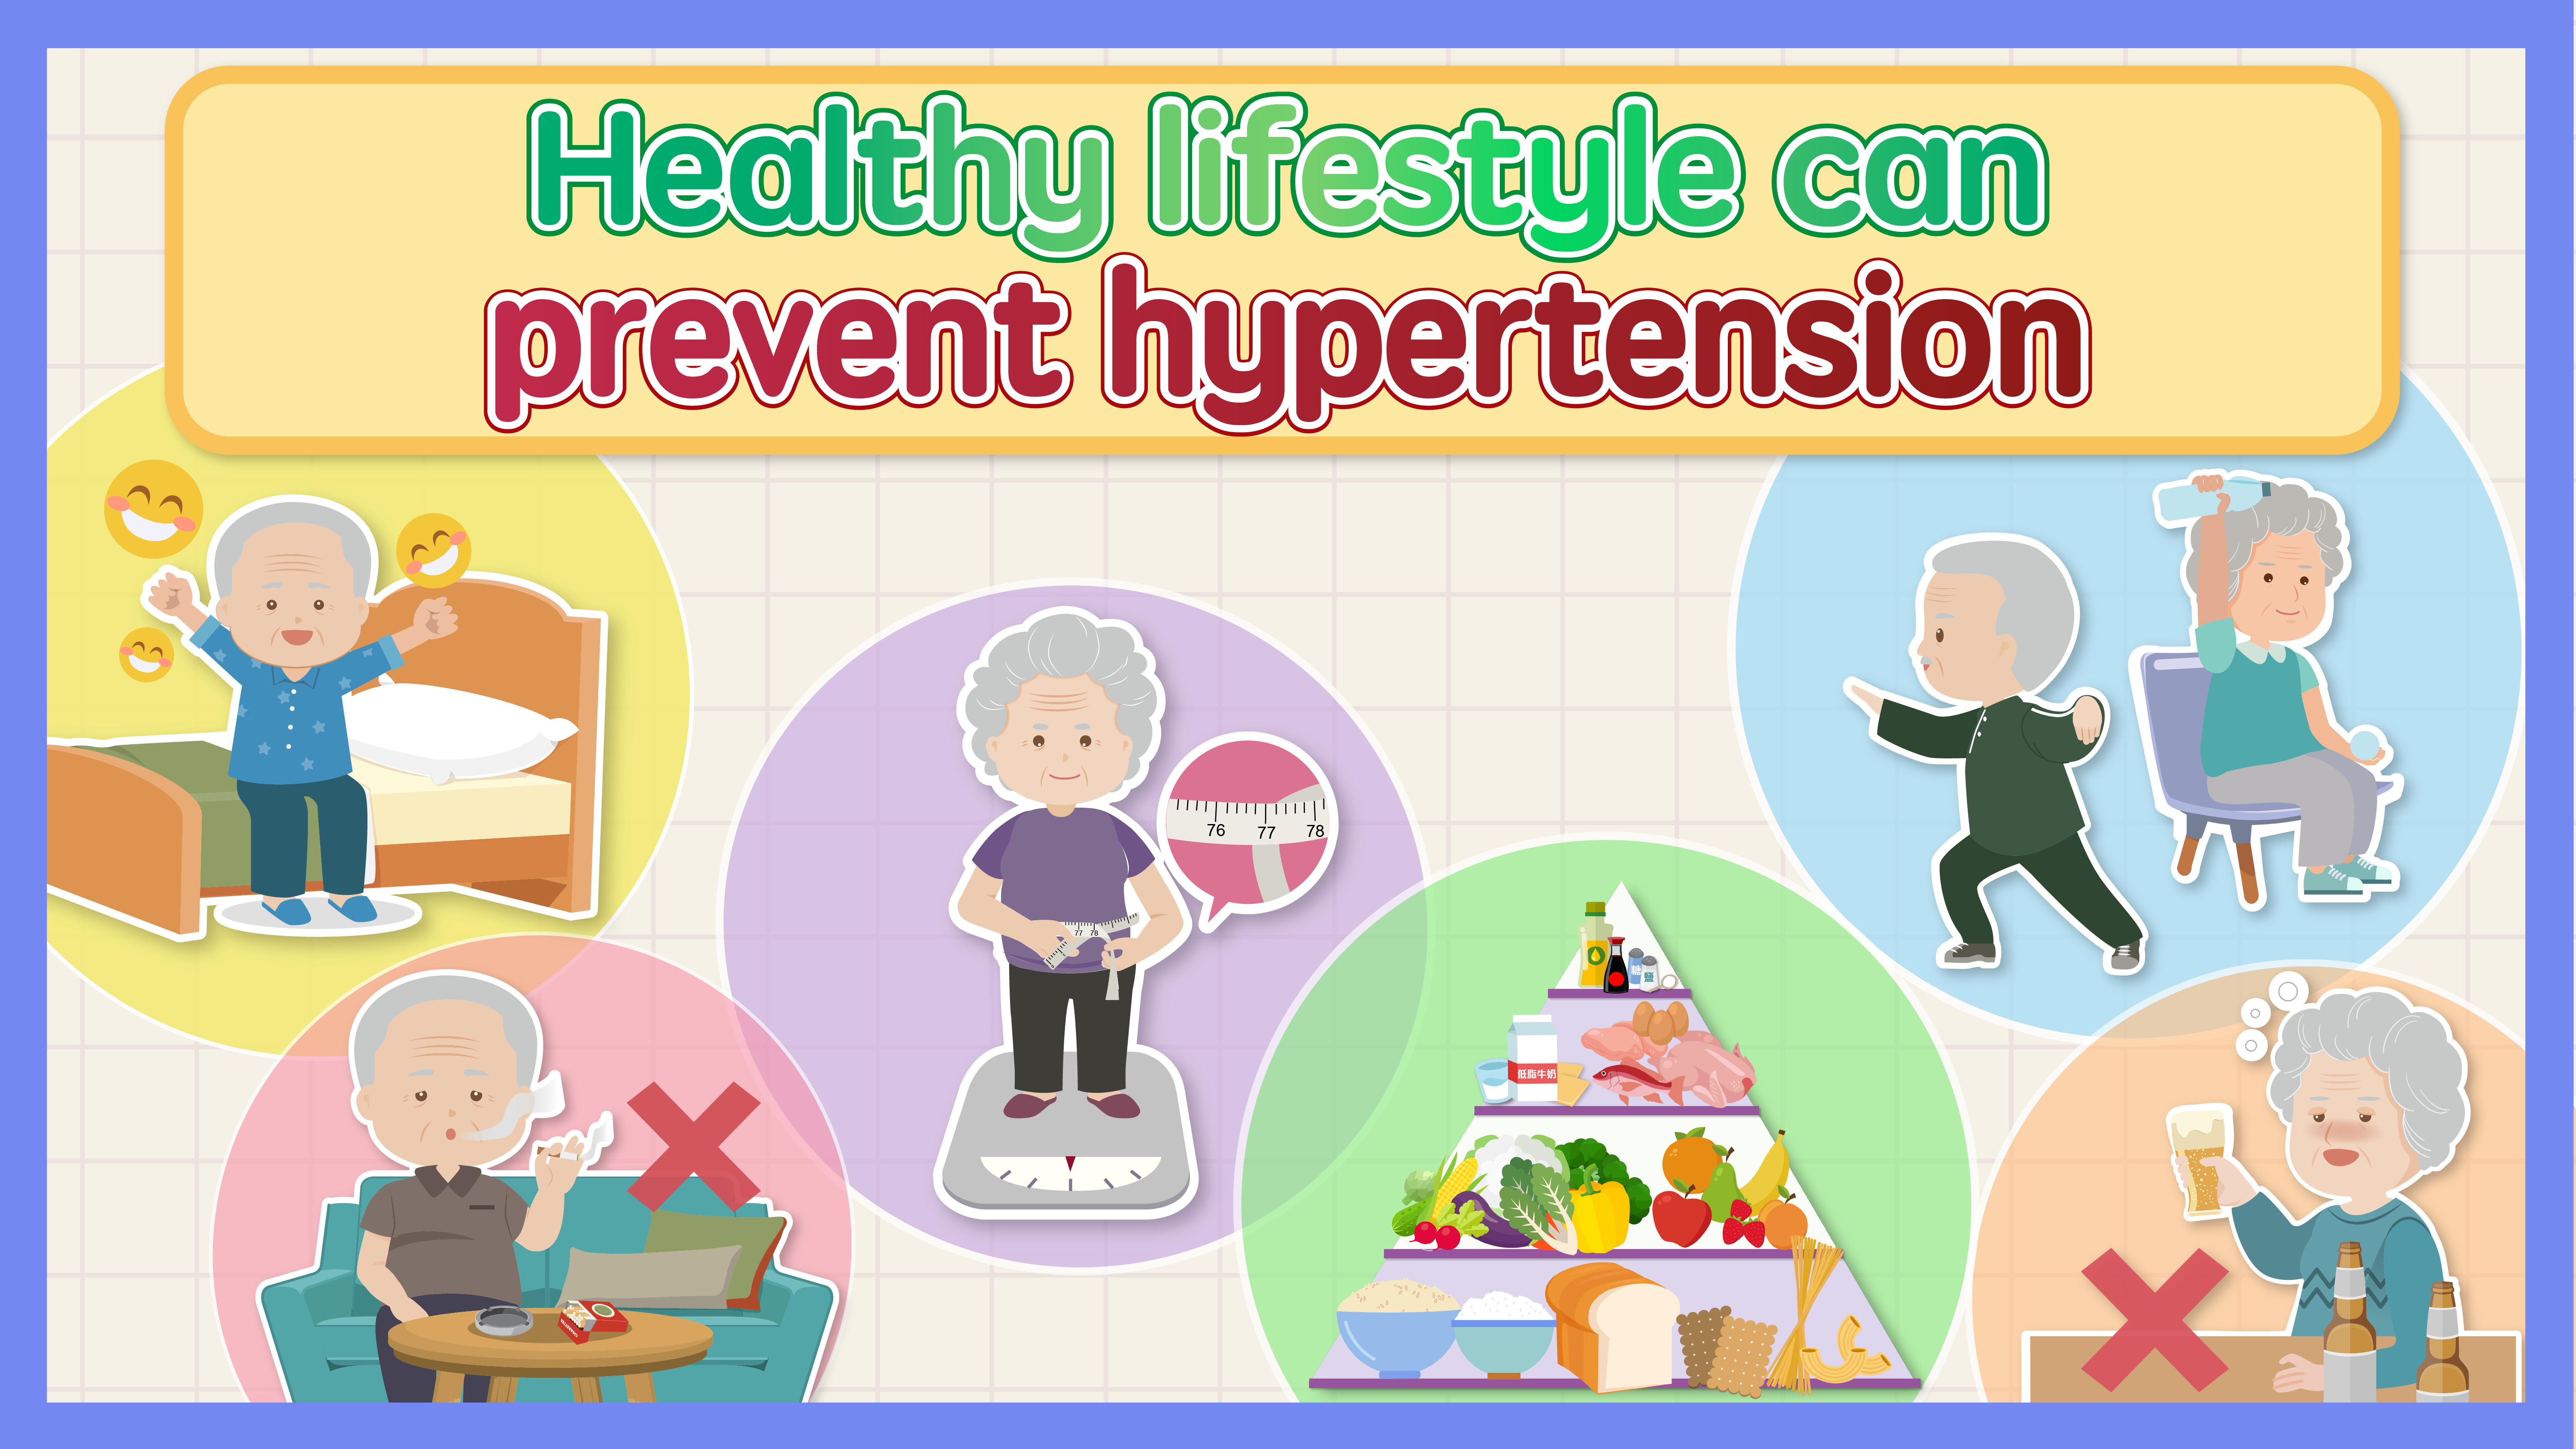 Healthy lifestyle can prevent hypertension